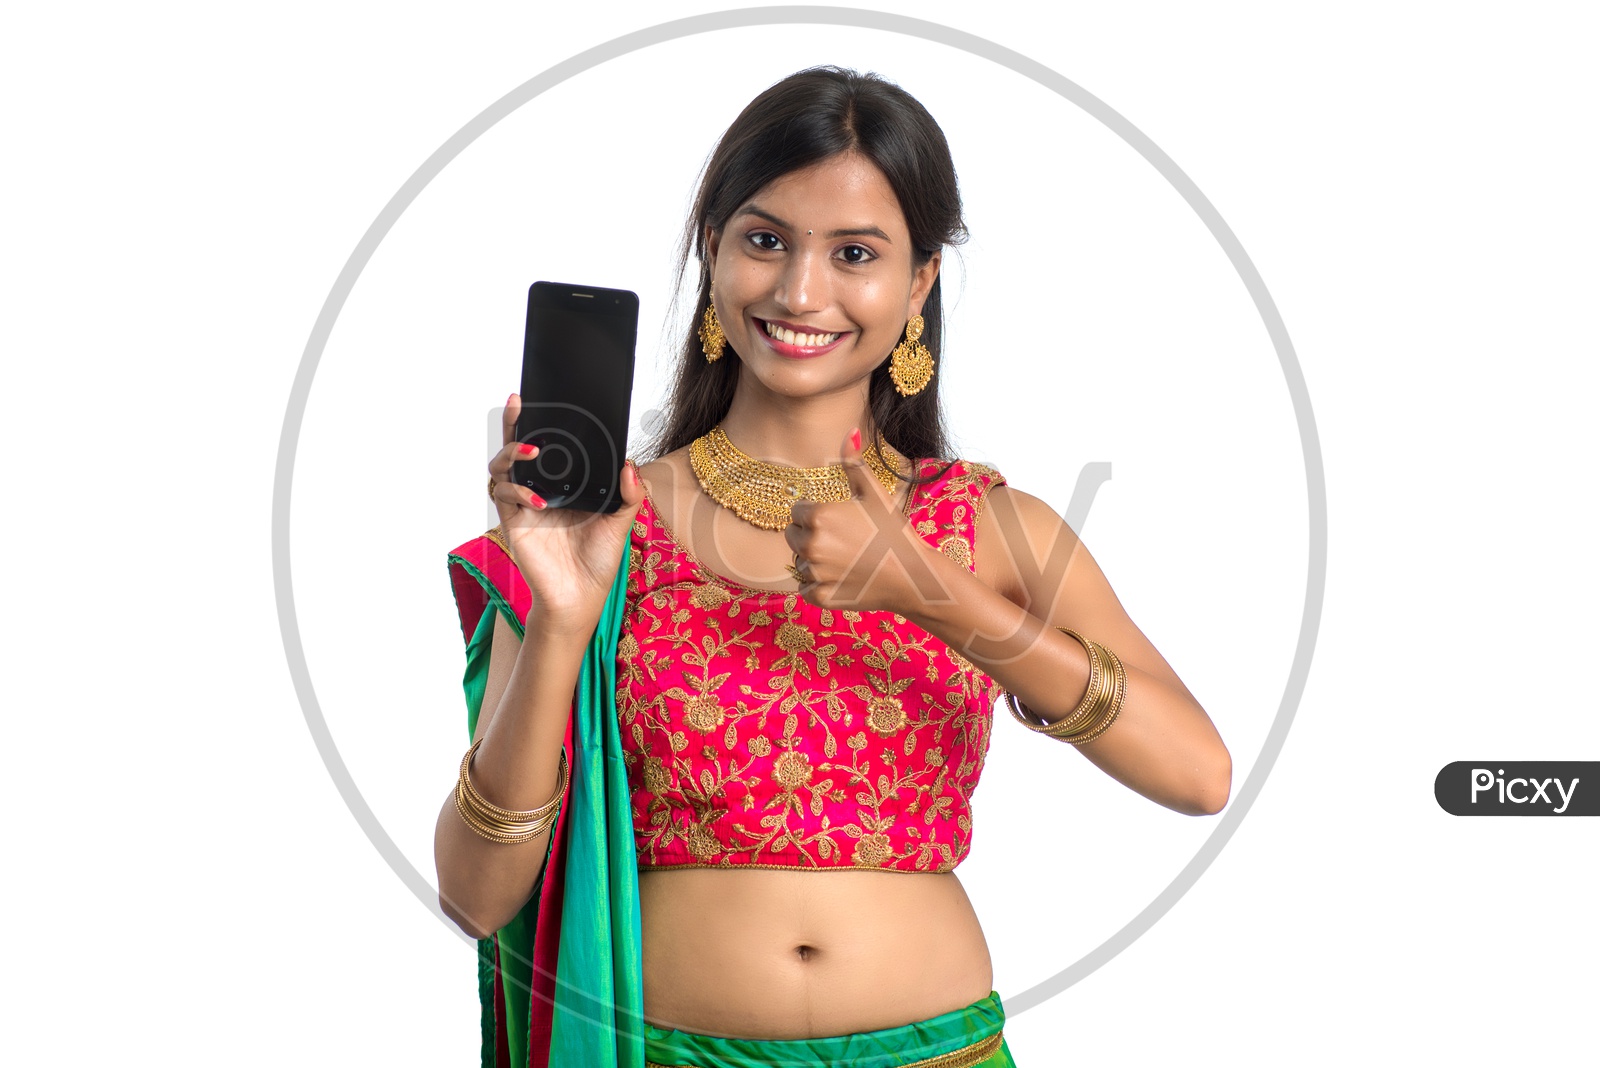 Portrait of a Young Traditional Indian  Woman  Showing Mobile Screen With an Expression and  a Gesture  over a White Isolated Background